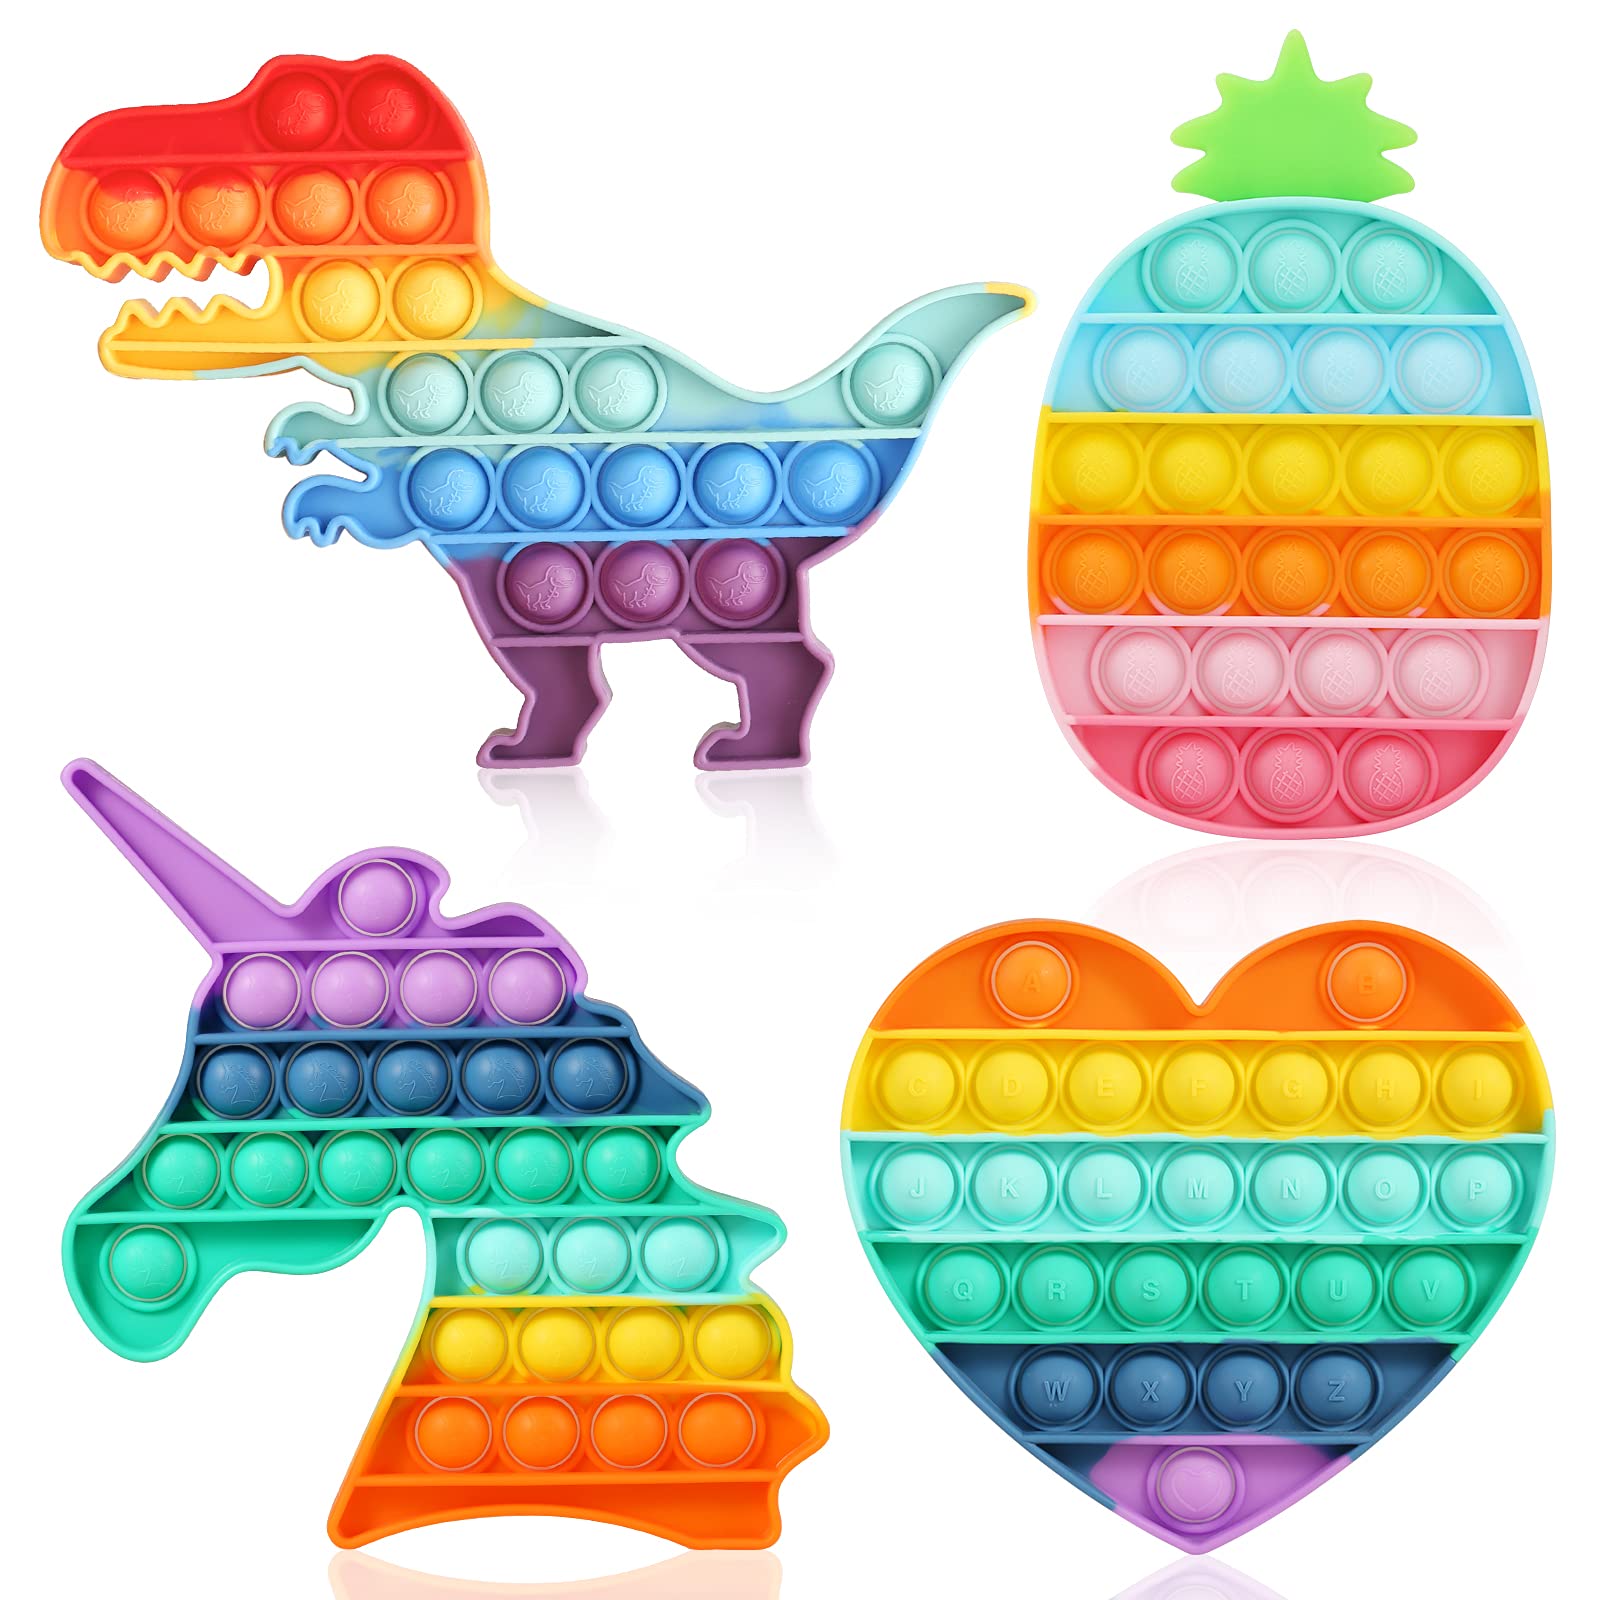 Fescuty Rainbow Fidget Toys Heart Sensory Toys Autism Learning Materials for Anxiety Stress Relief Squeeze Toy (4 Pack Rainbow)